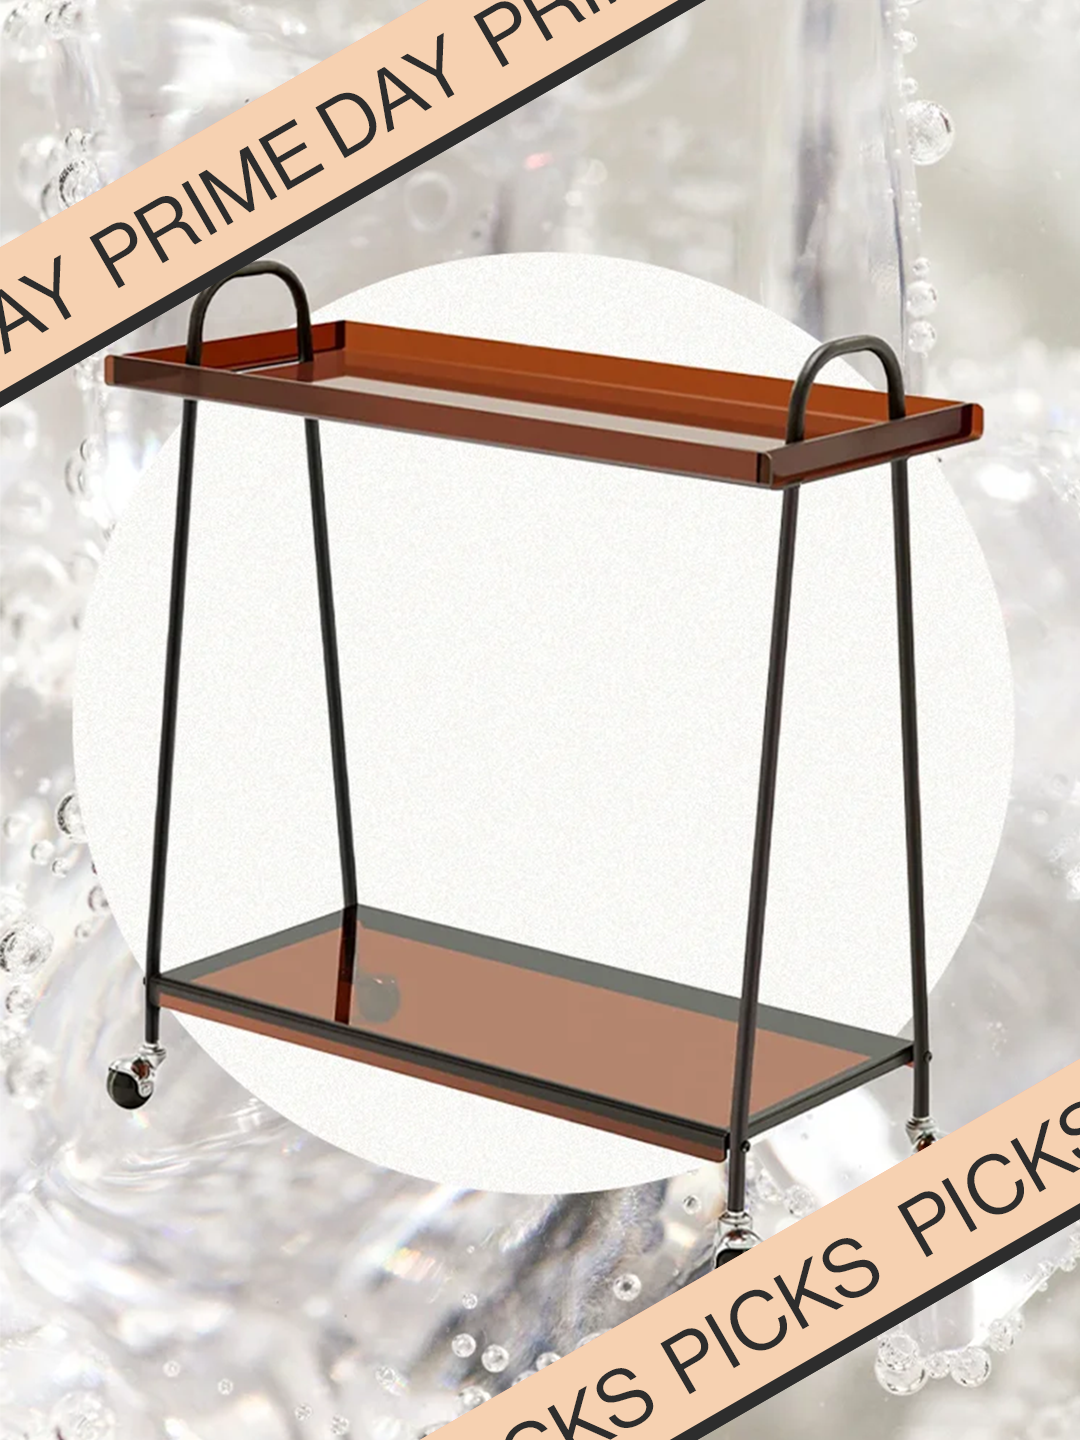 Brown acrylic shelves, compact bar cart with wheels on gray bubble background